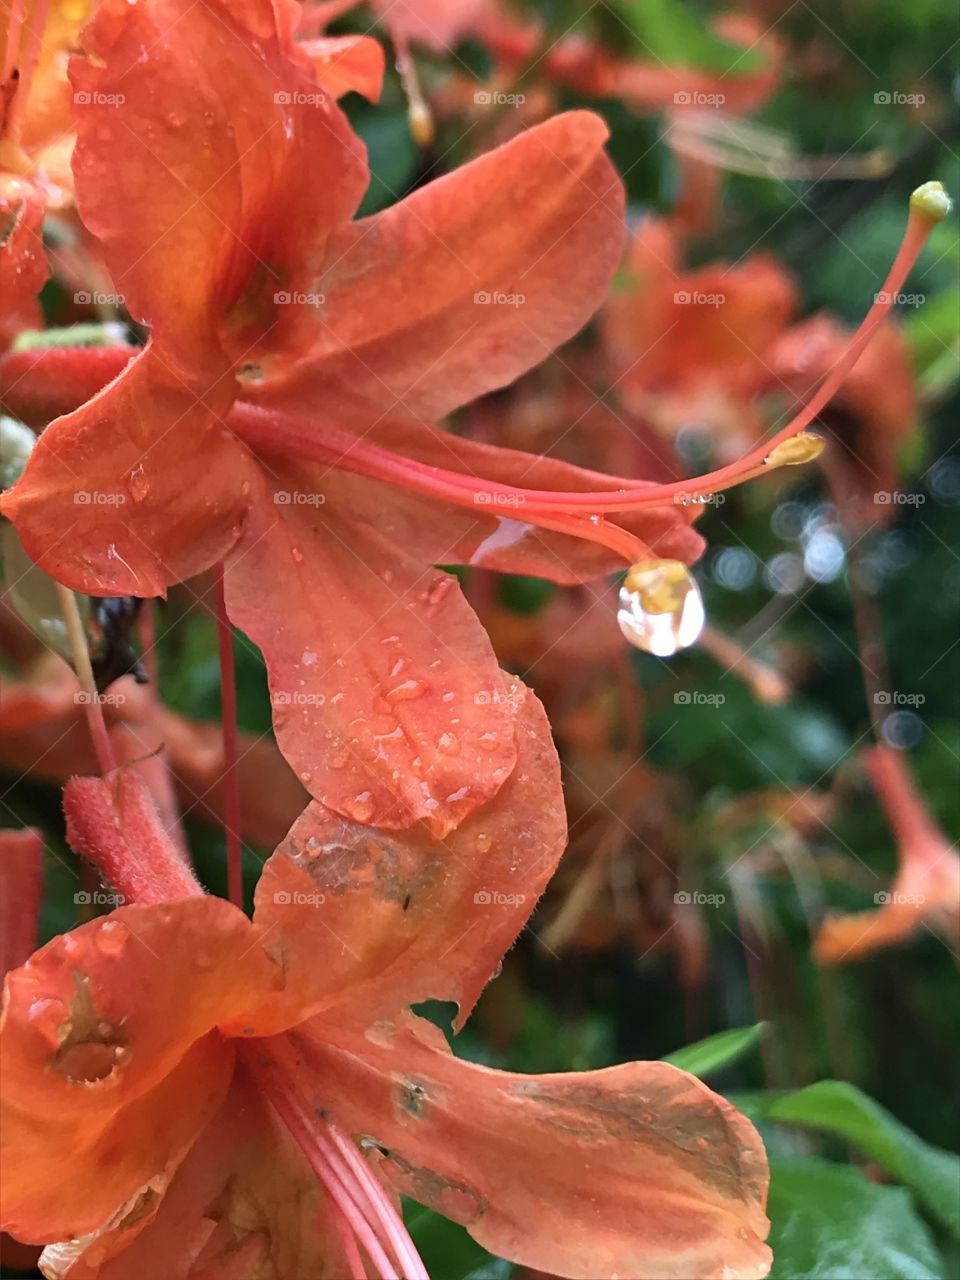 Close up of rain dripping from the stamen of an orange flower near a community garden in Brevard, NC